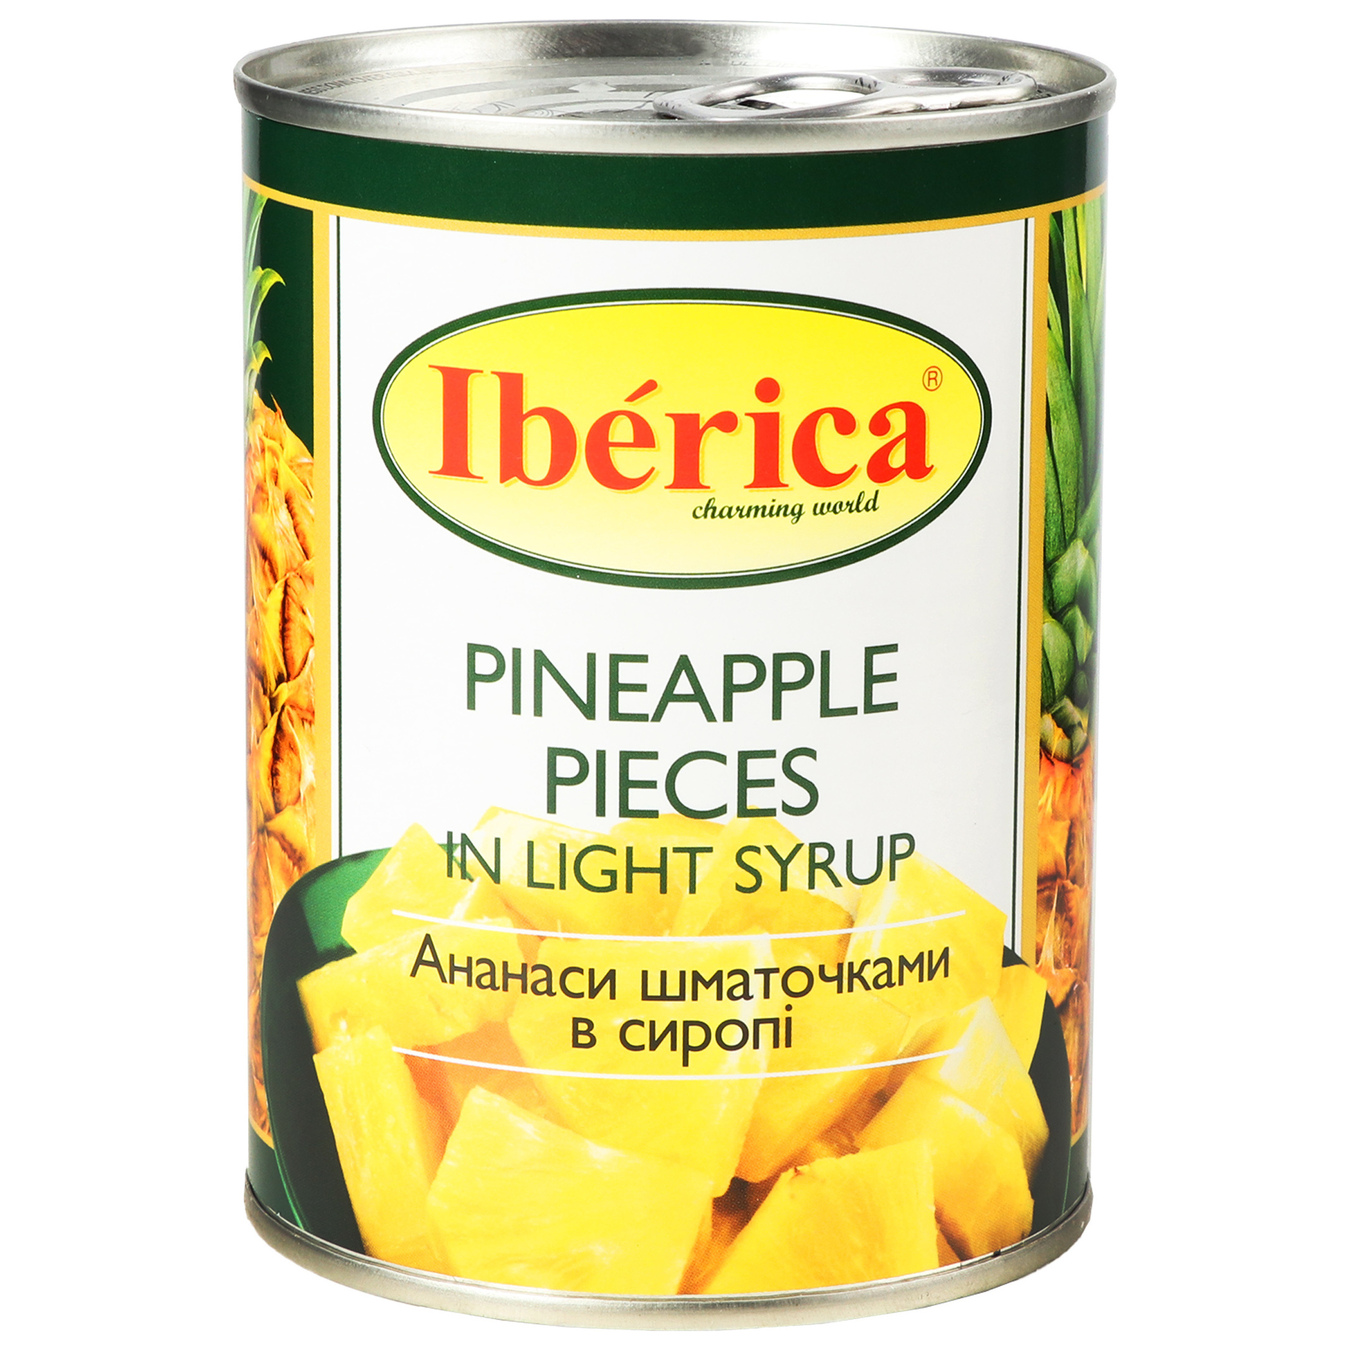 Canned Iberica pineapple pieces 565g 2